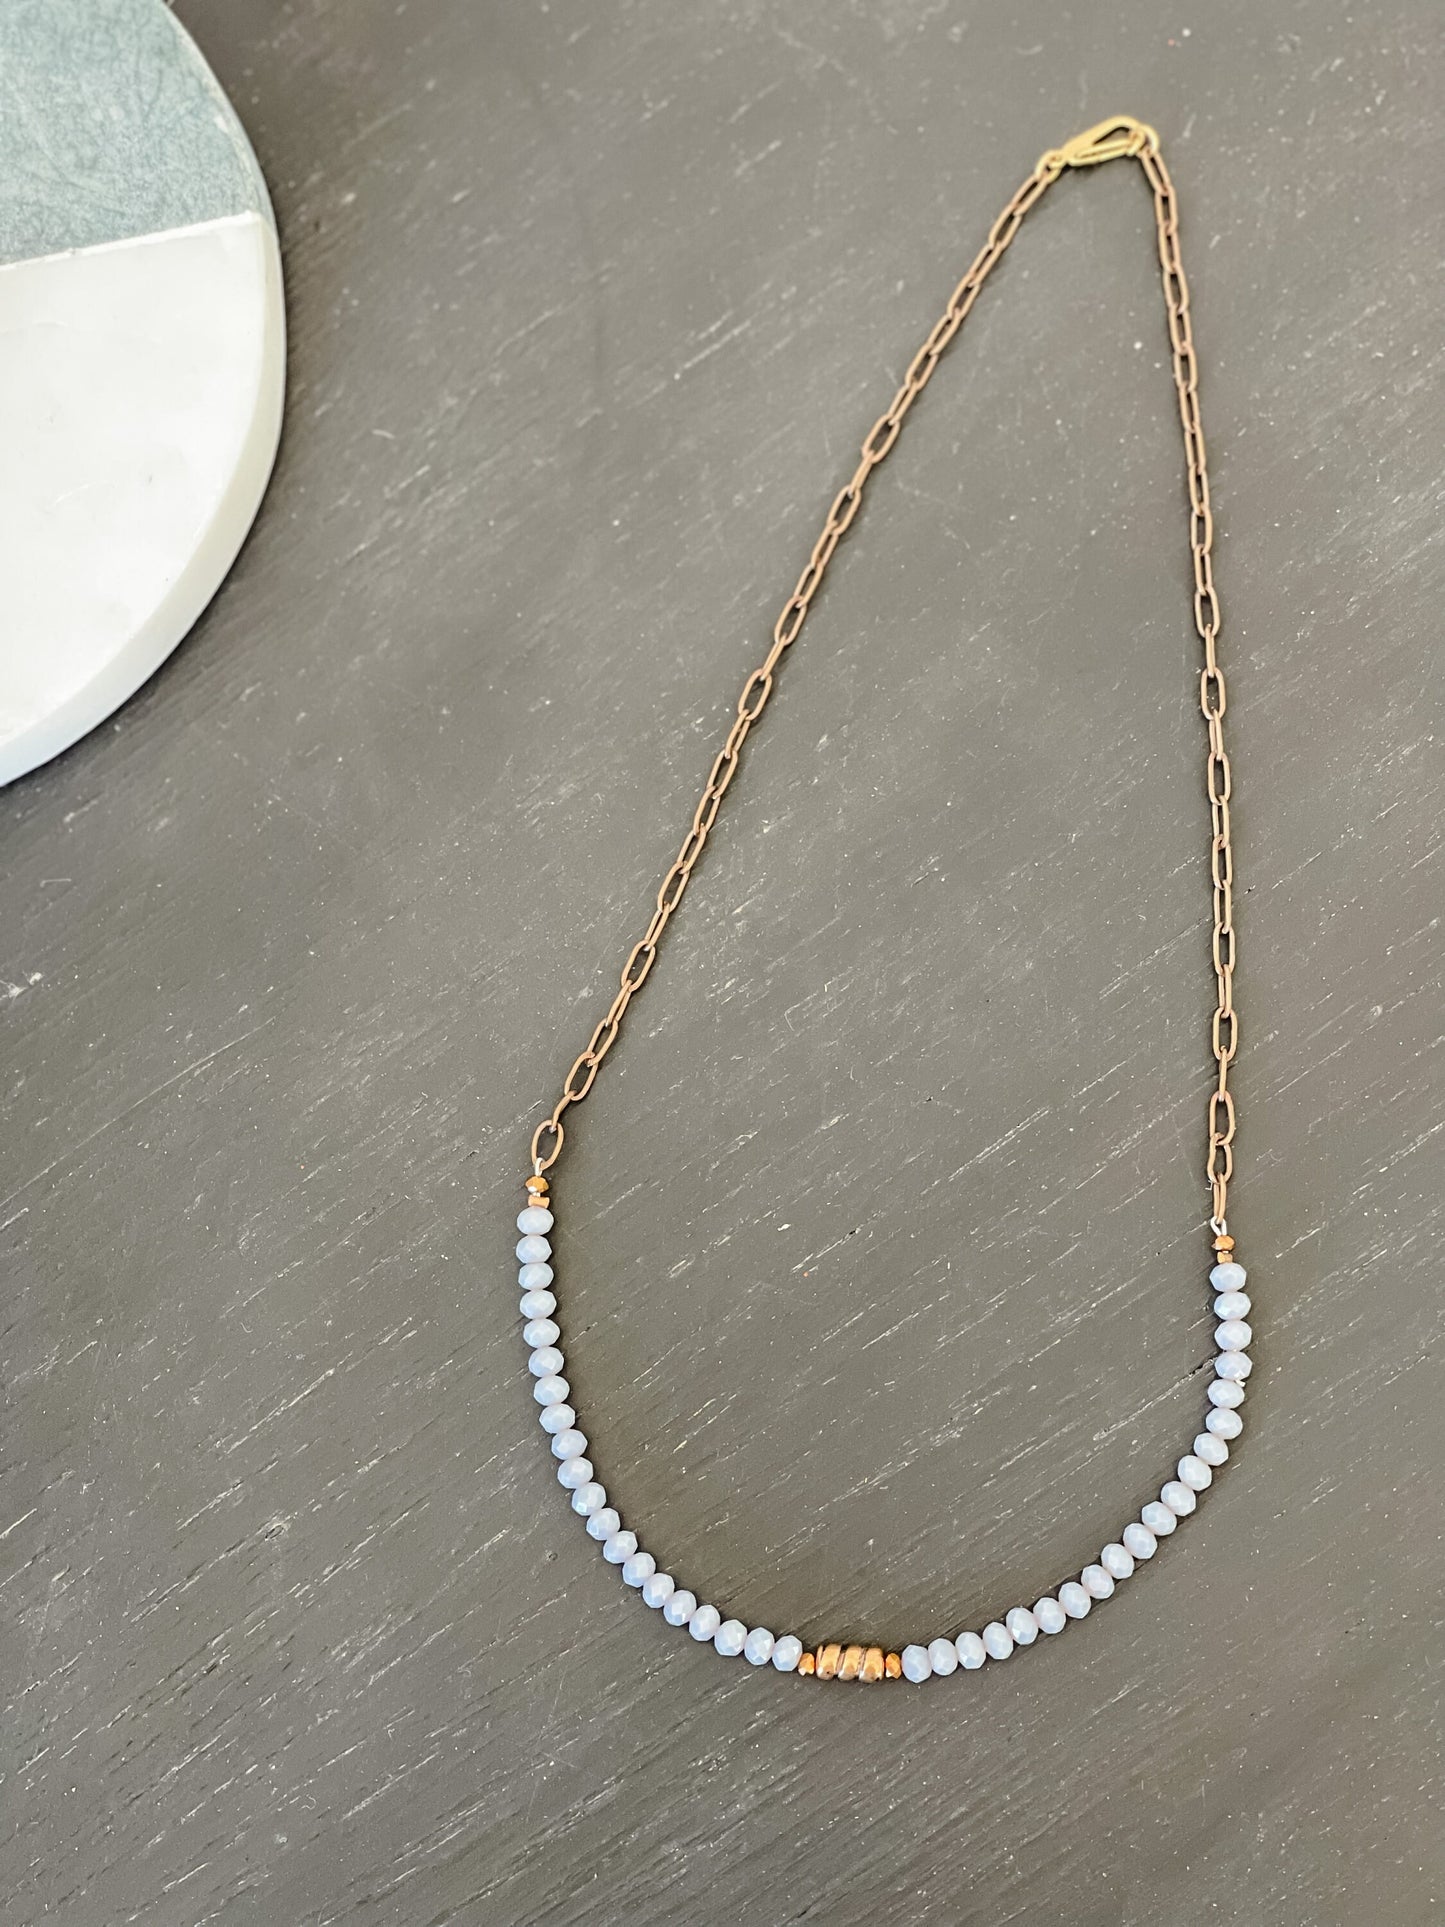 Periwinkle Bead & Chain Necklace